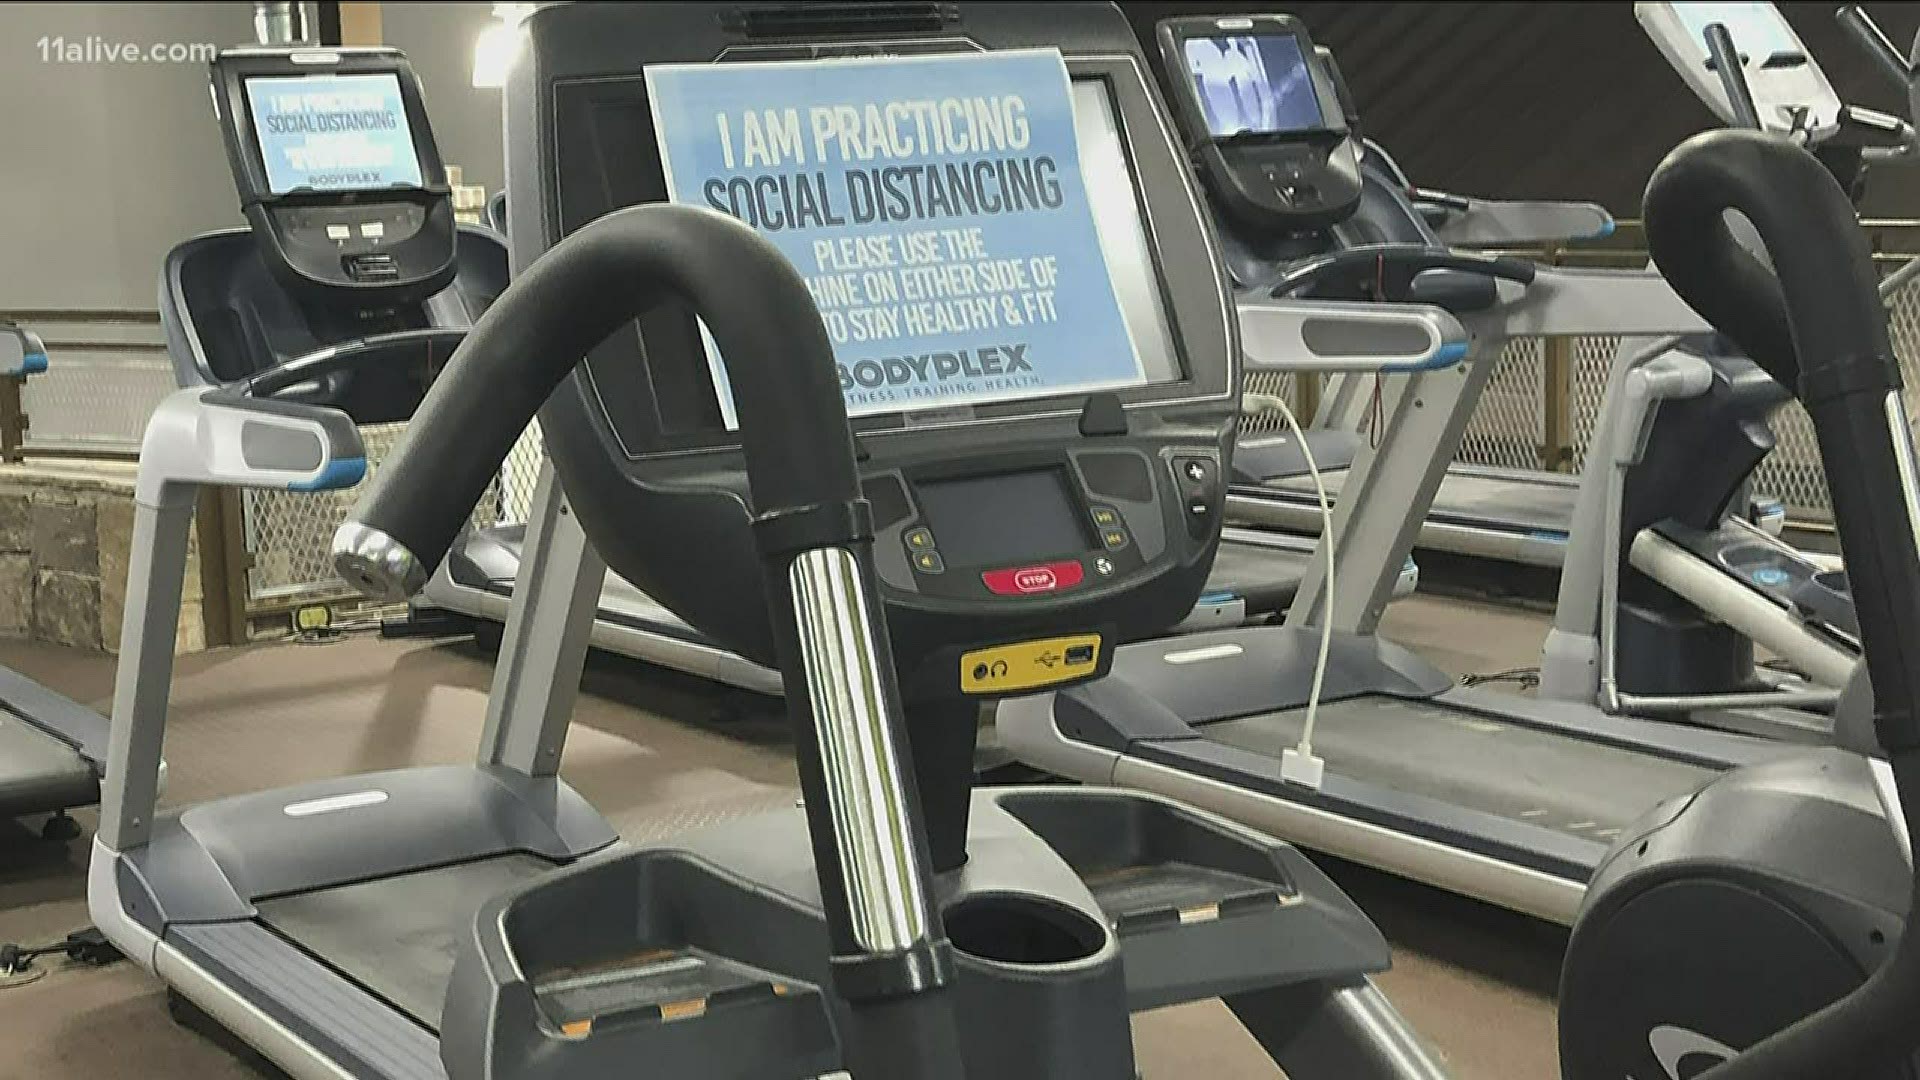 An Atlanta doctor has some advice and cautions to share as more gyms and fitness centers open during the coronavirus pandemic.